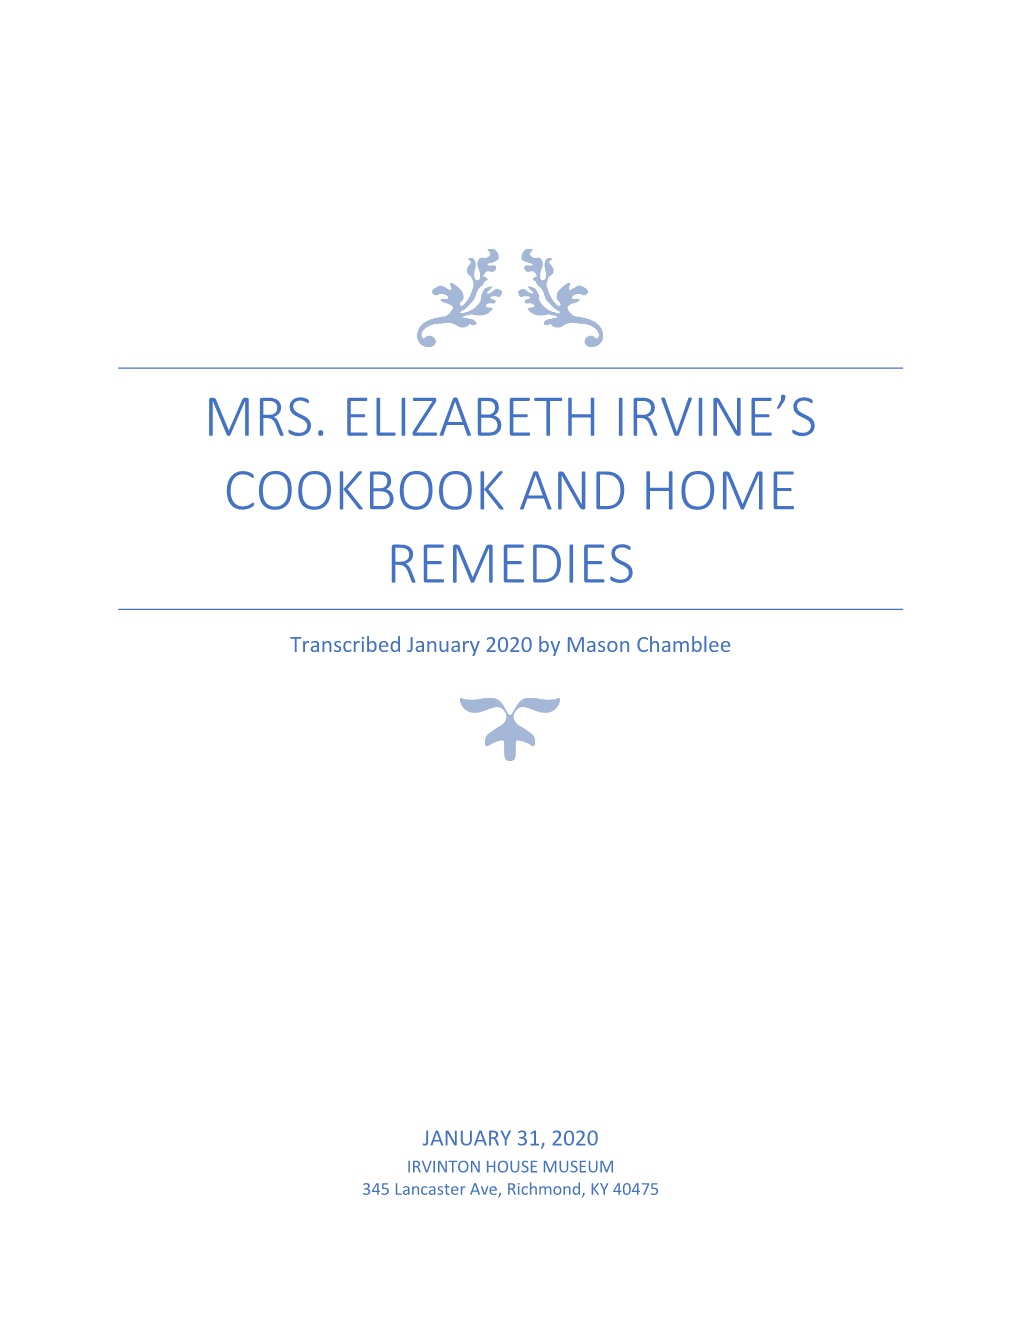 Mrs Irvine's Cookbook and Home Remedies